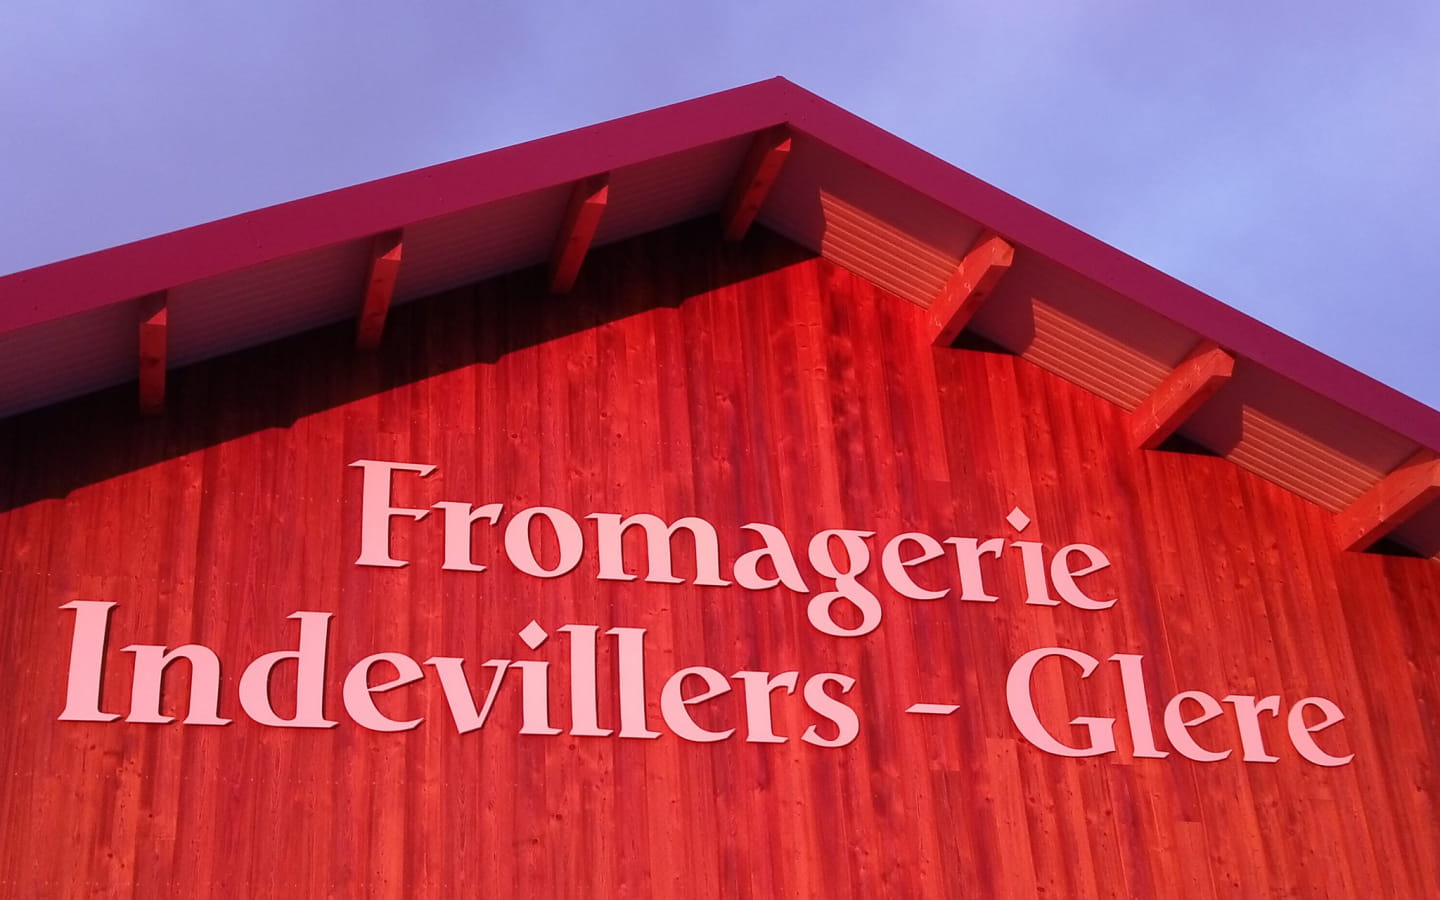 Fromagerie d'Indevillers-Glère